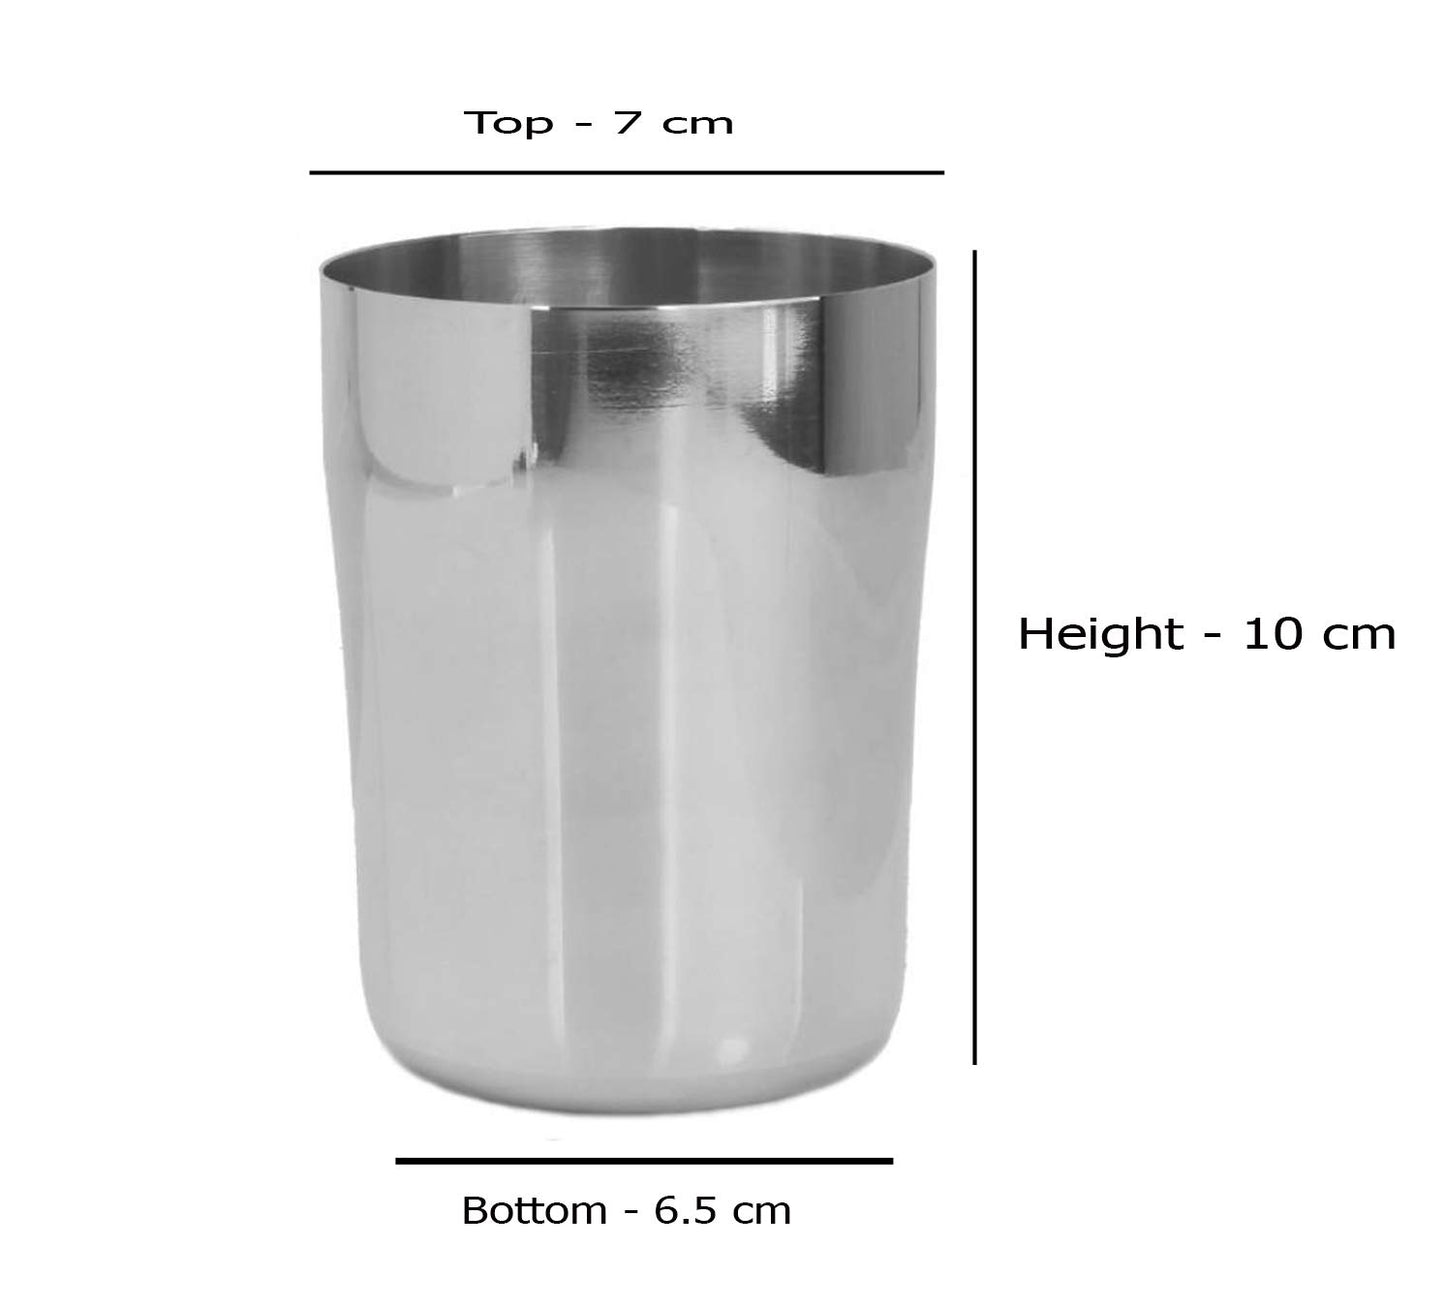 Stainless Steel Water Juice Glass | Tumbler Set of 4 Pcs - 7cm